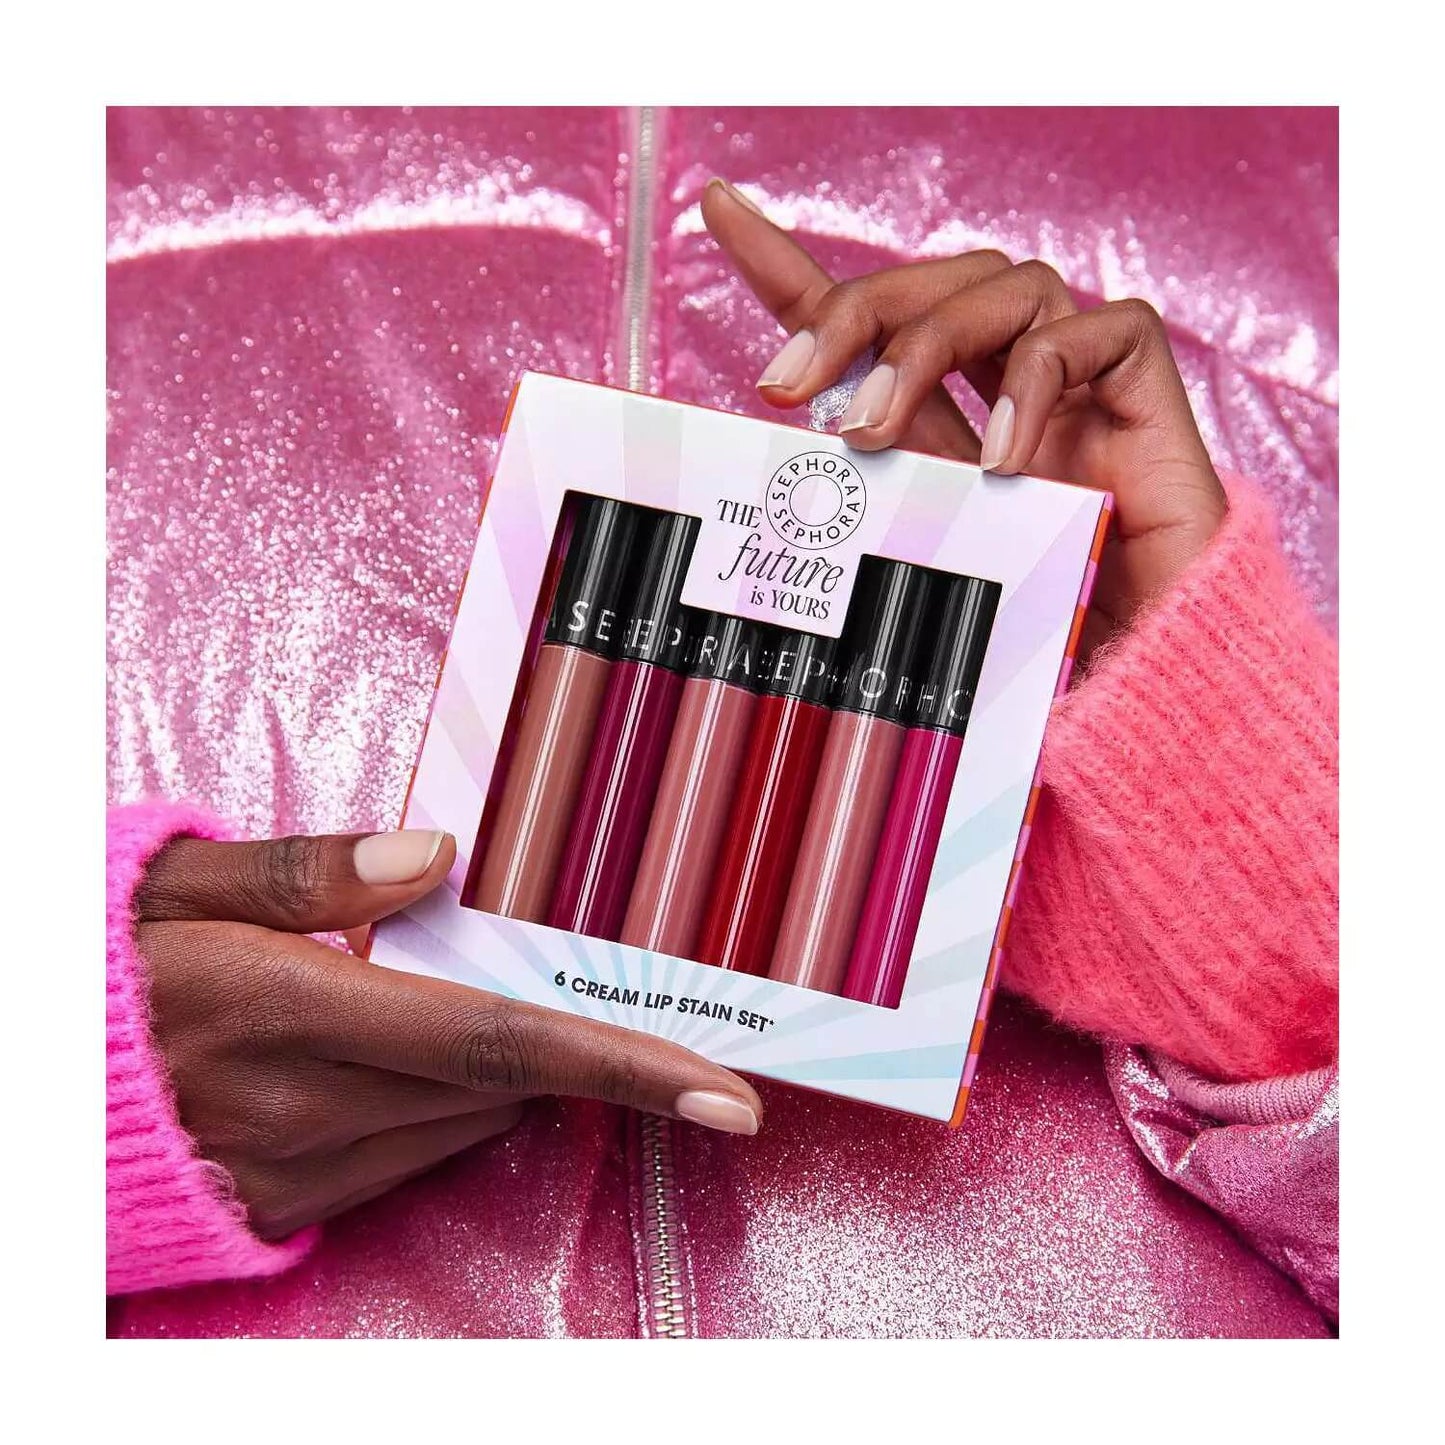 Shop Sephora Cream Lip Stain Set available at Heygirl.pk for delivery in Pakistan